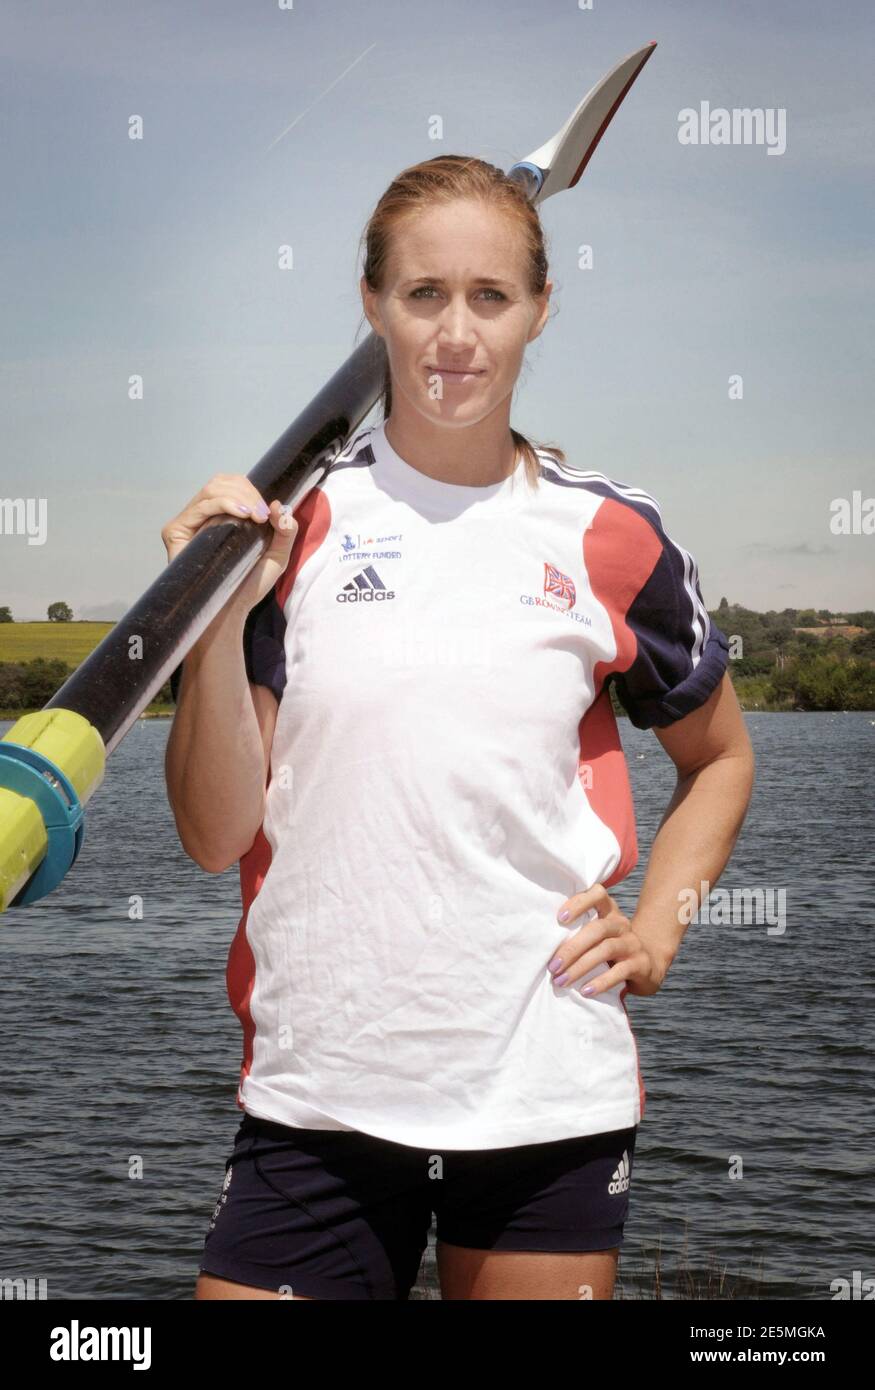 Pinsent-Redgrave Rwoing Centre, River Thames, Reading, United Kingdom. 07 June 2013. Helen Glover at a GB Rwoing photo-call. in 2021 she announced her return to rowing to compete at the Tokyo 2021 Olympic Games. © Tim Redgrove Stock Photo